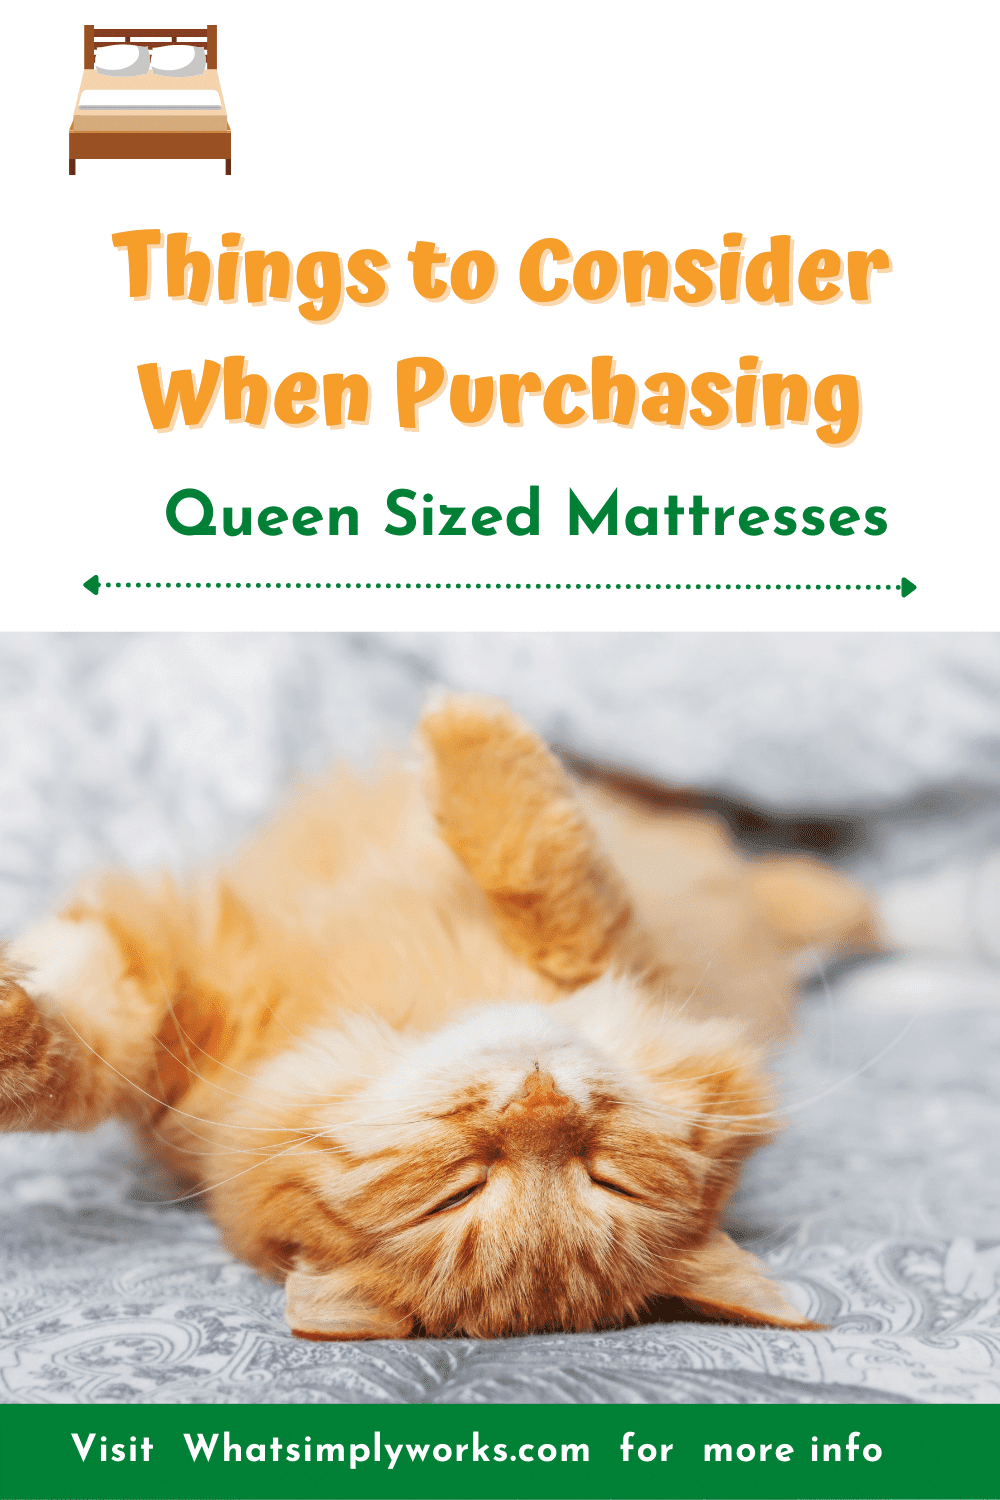 Things to Consider When Purchasing Queen Sized Mattresses